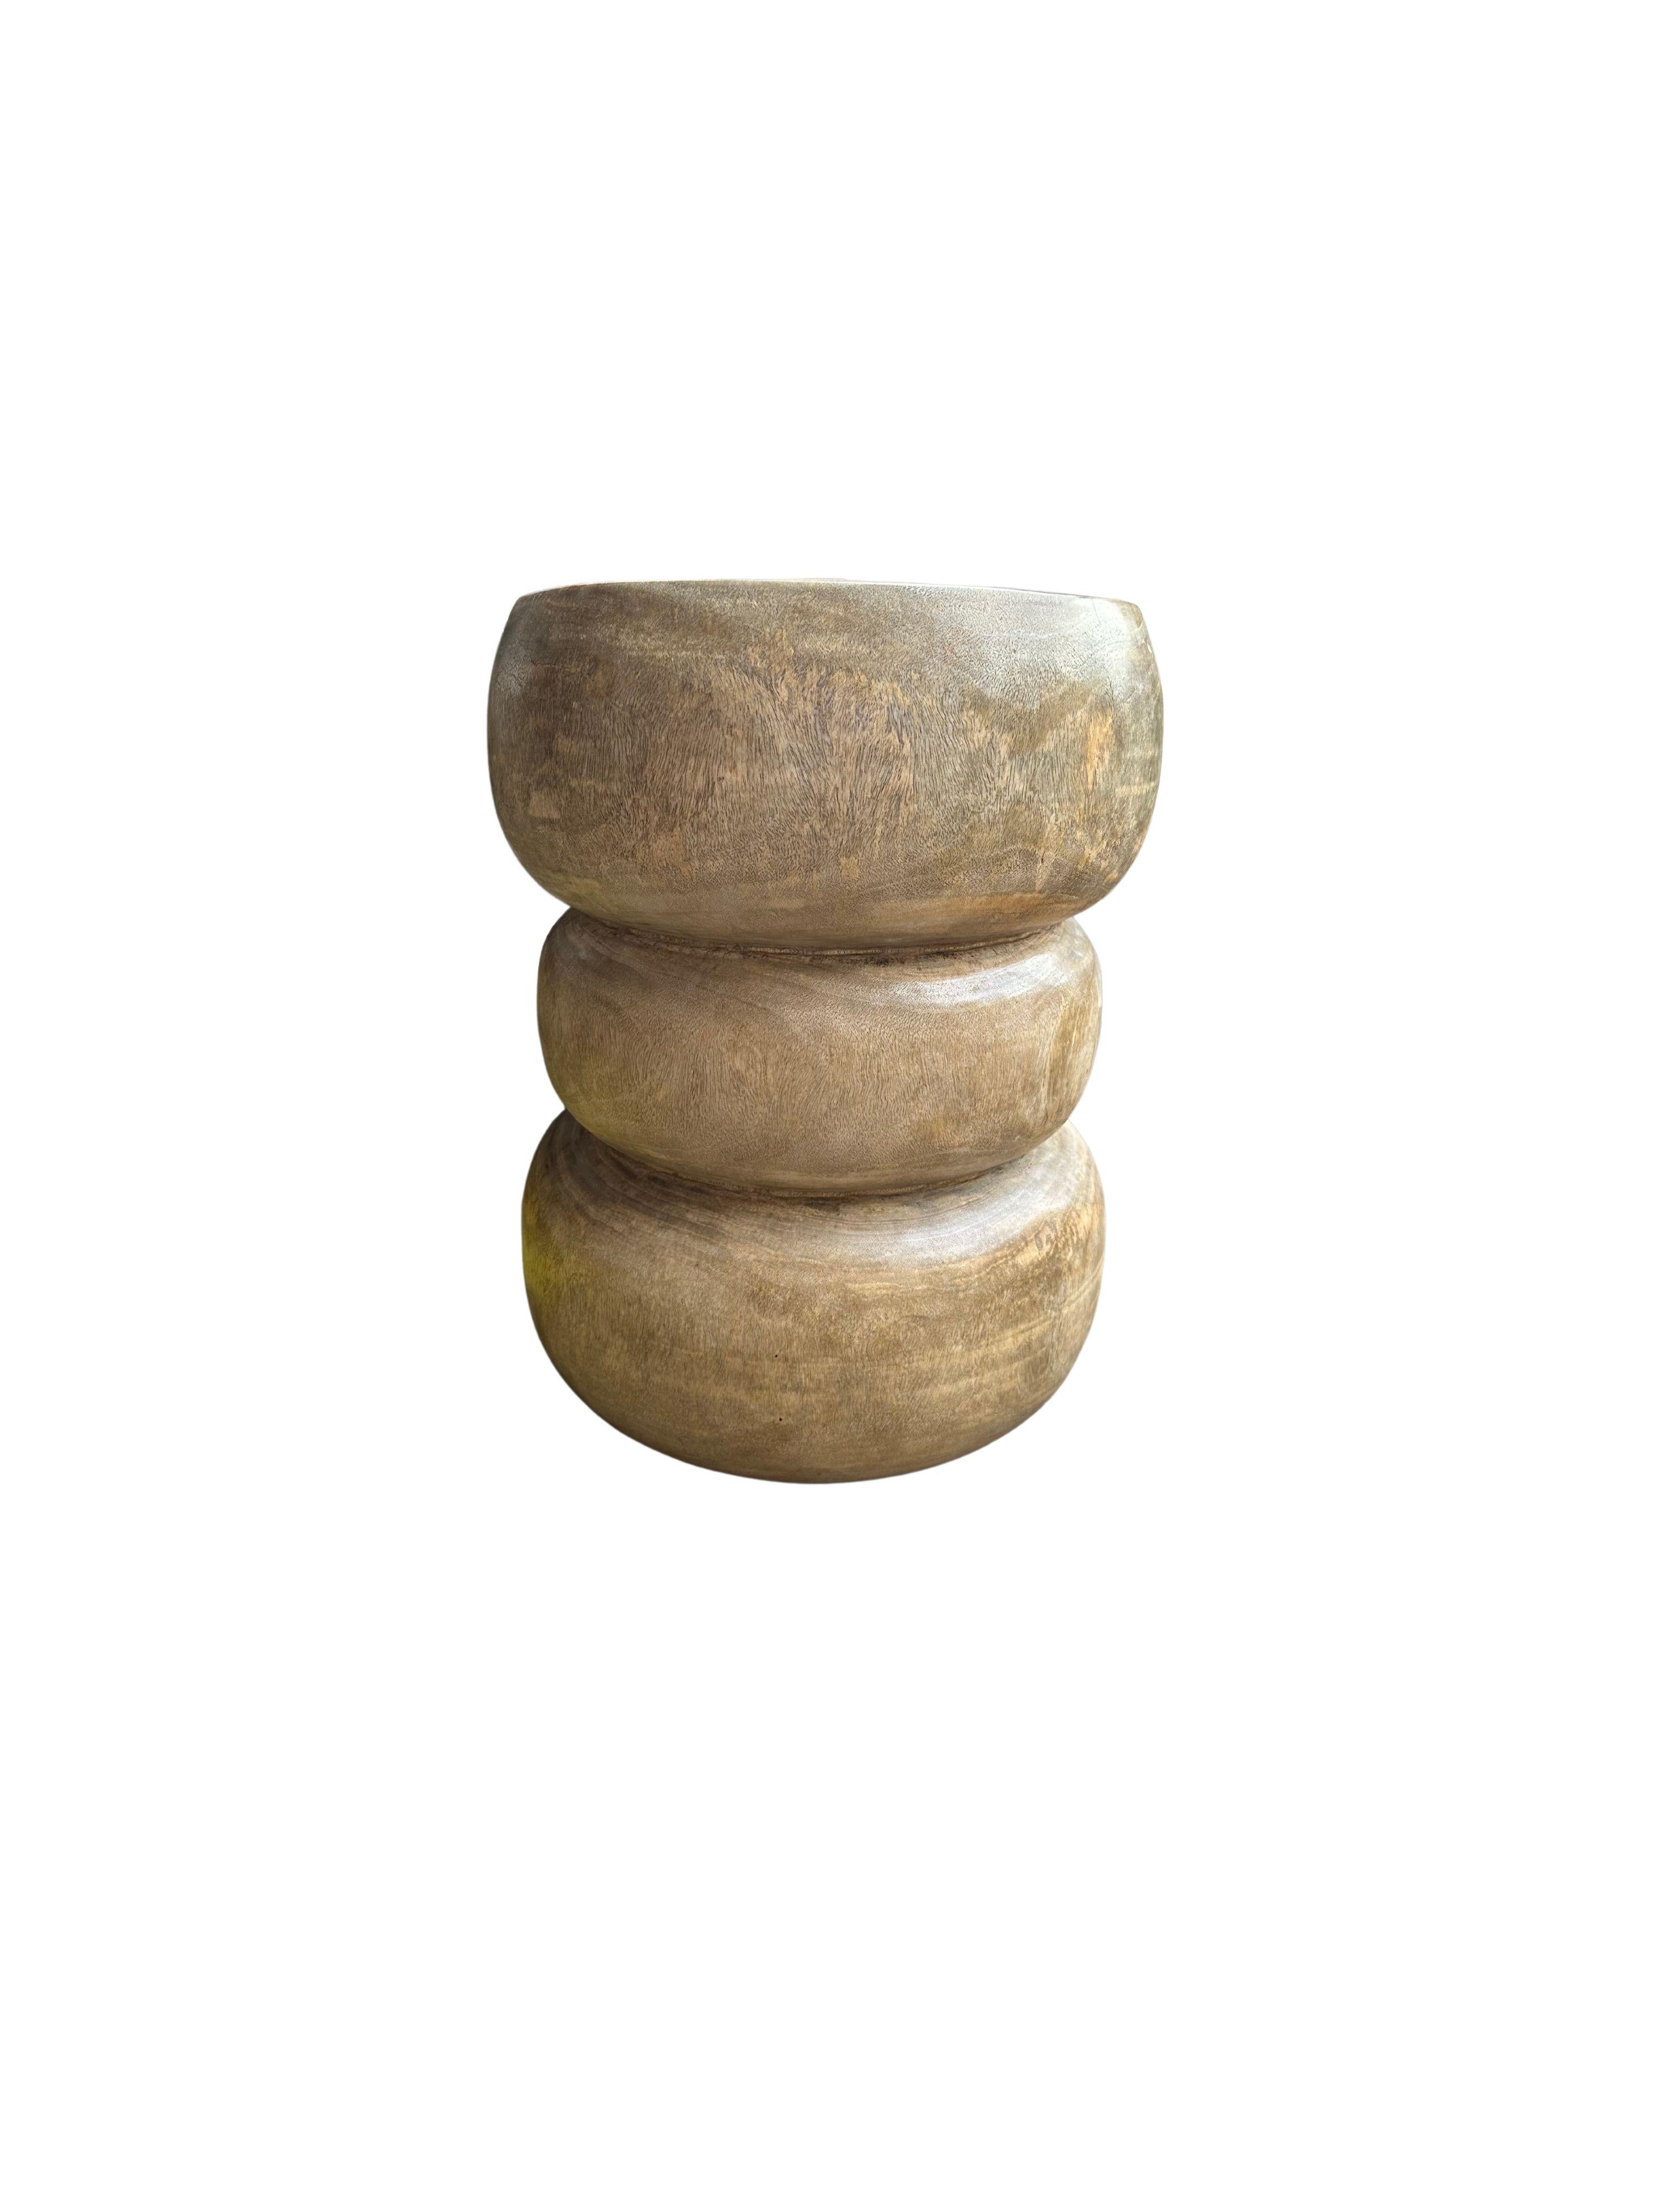 Indonesian Sculptural Mango Wood Side Table, Stacked Design Hand-Crafted Modern Organic For Sale